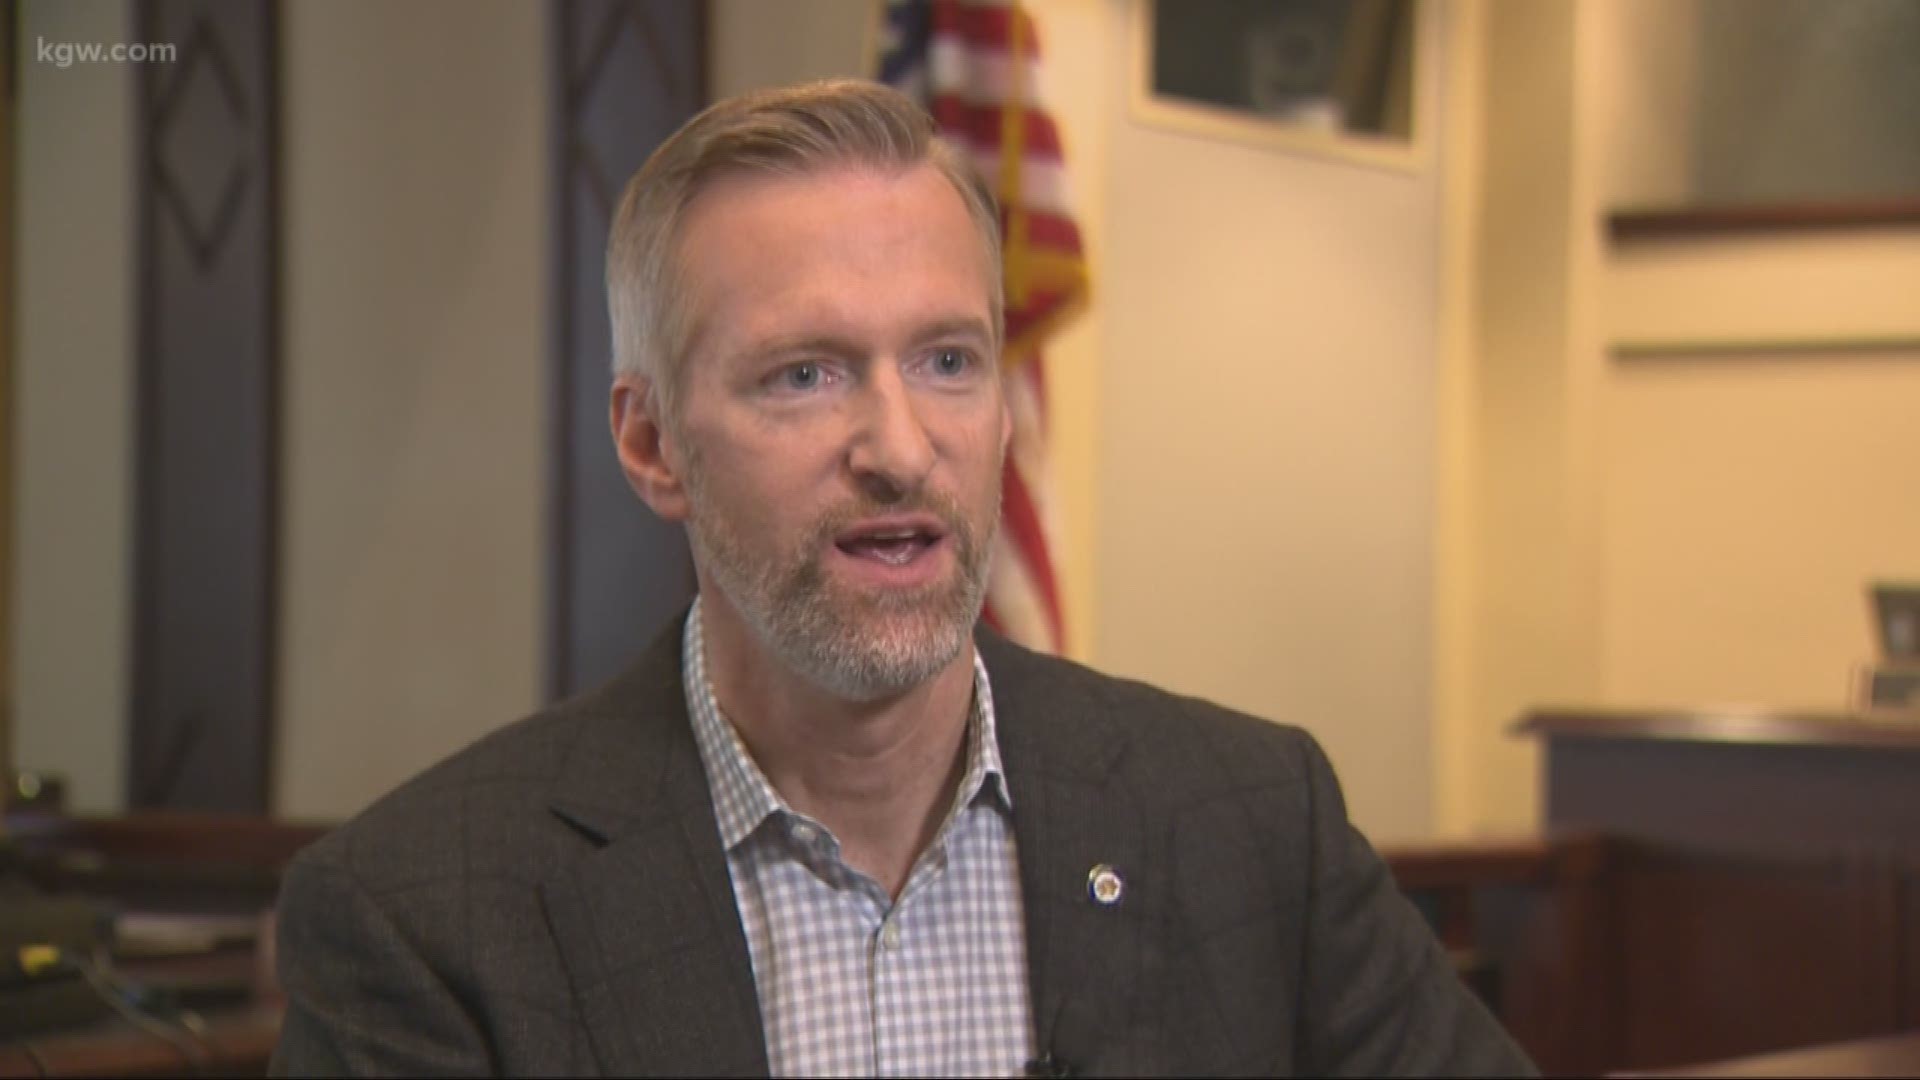 Portland Mayor Ted Wheeler is taking a bit of a victory lap after Saturday’s rallies between right- and left-wing groups mostly fizzled. “We said that if you came here, we’d be ready for you if you wanted to commit acts of violence. And we were,” the mayor said during a conversation with KGW’s Lindsay Nadrich.